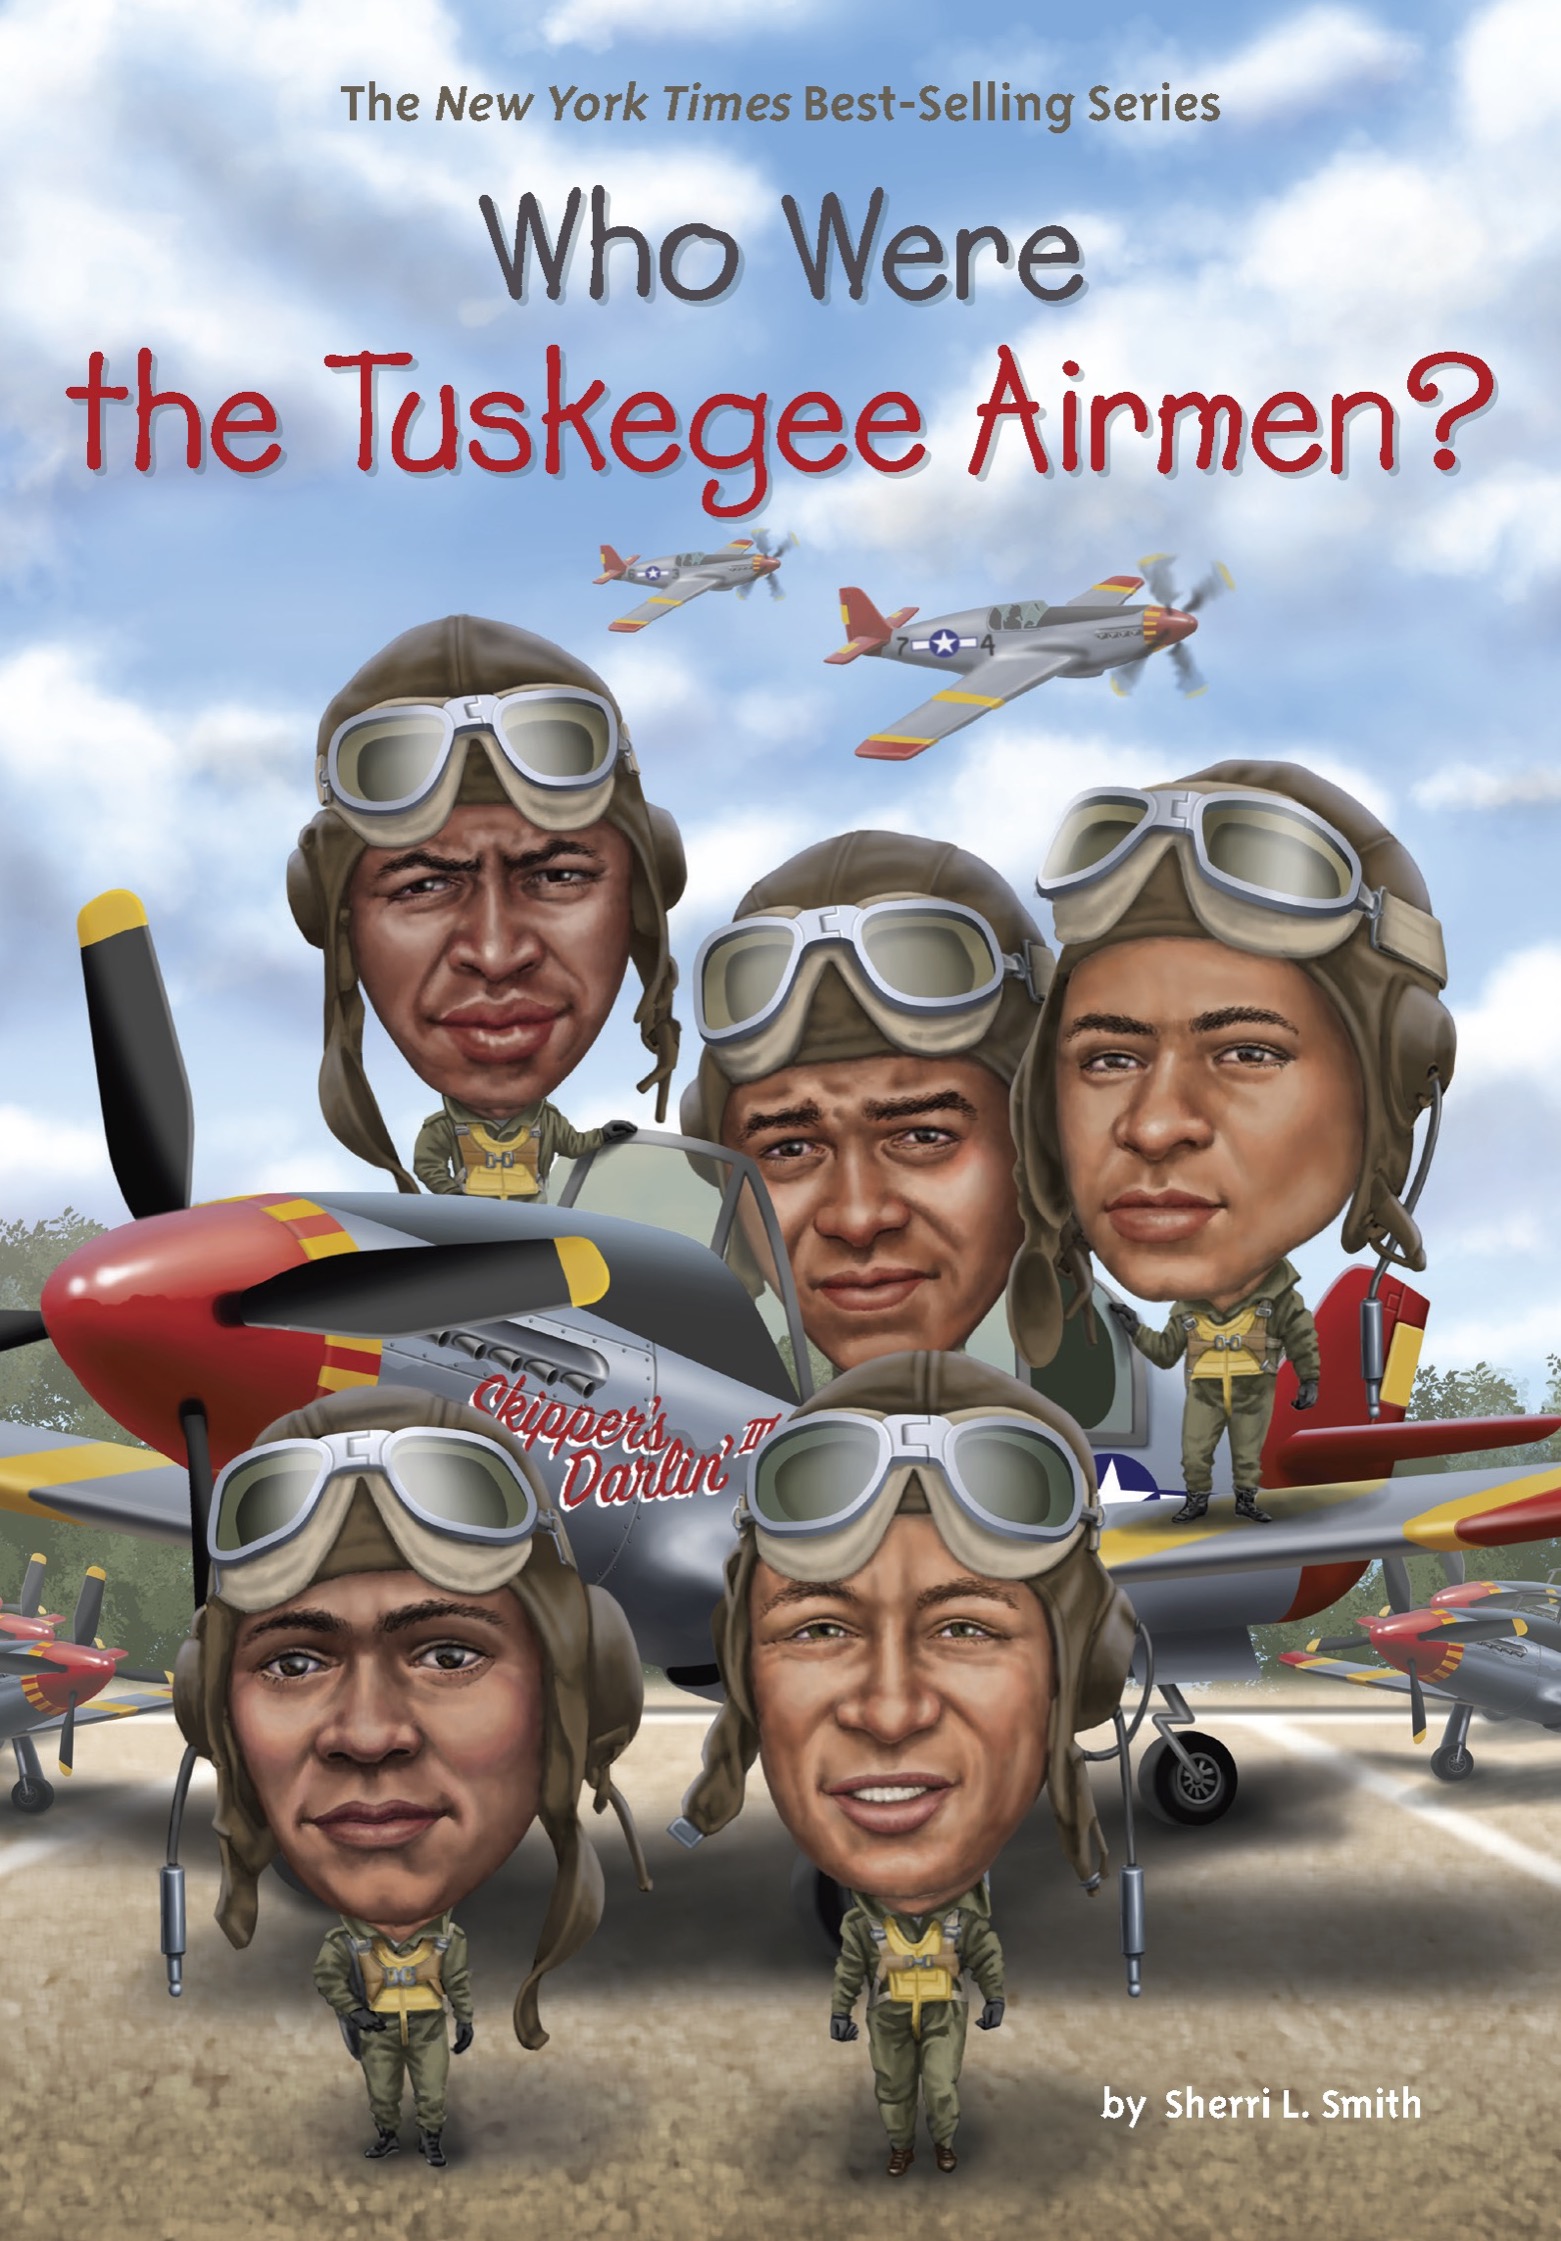 In honor of the Tuskegee Airmen on land and in the air to my brother Derek - photo 1